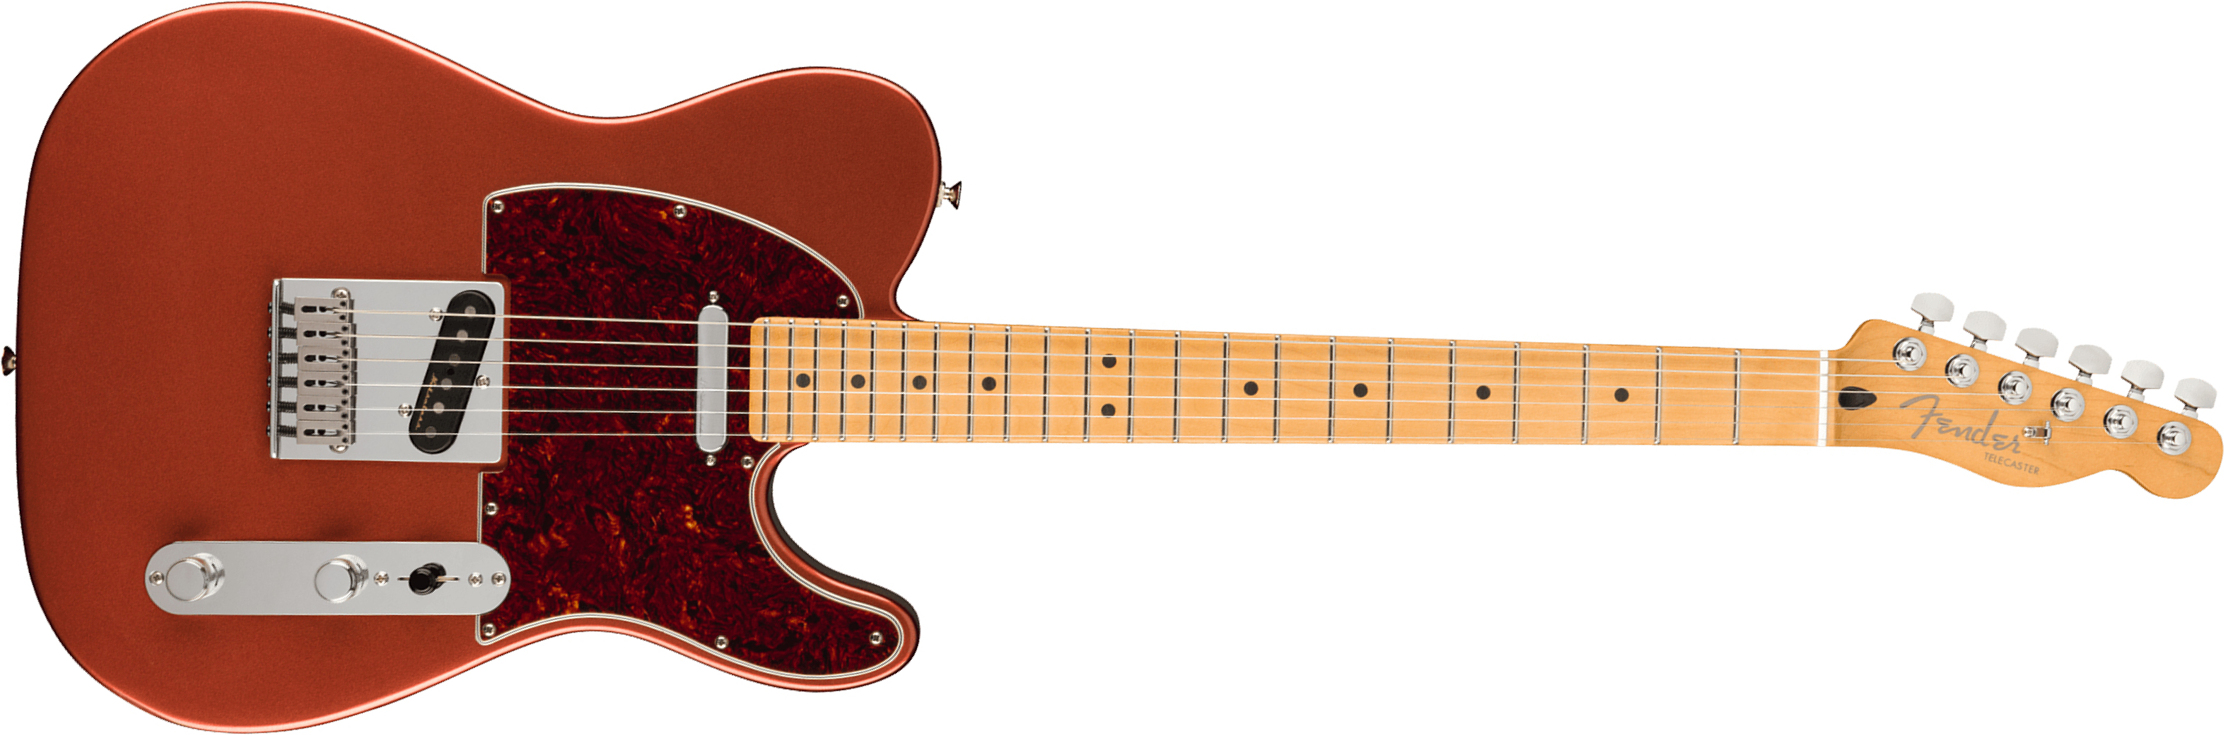 Fender Tele Player Plus Mex 2s Ht Mn - Aged Candy Apple Red - E-Gitarre in Teleform - Main picture